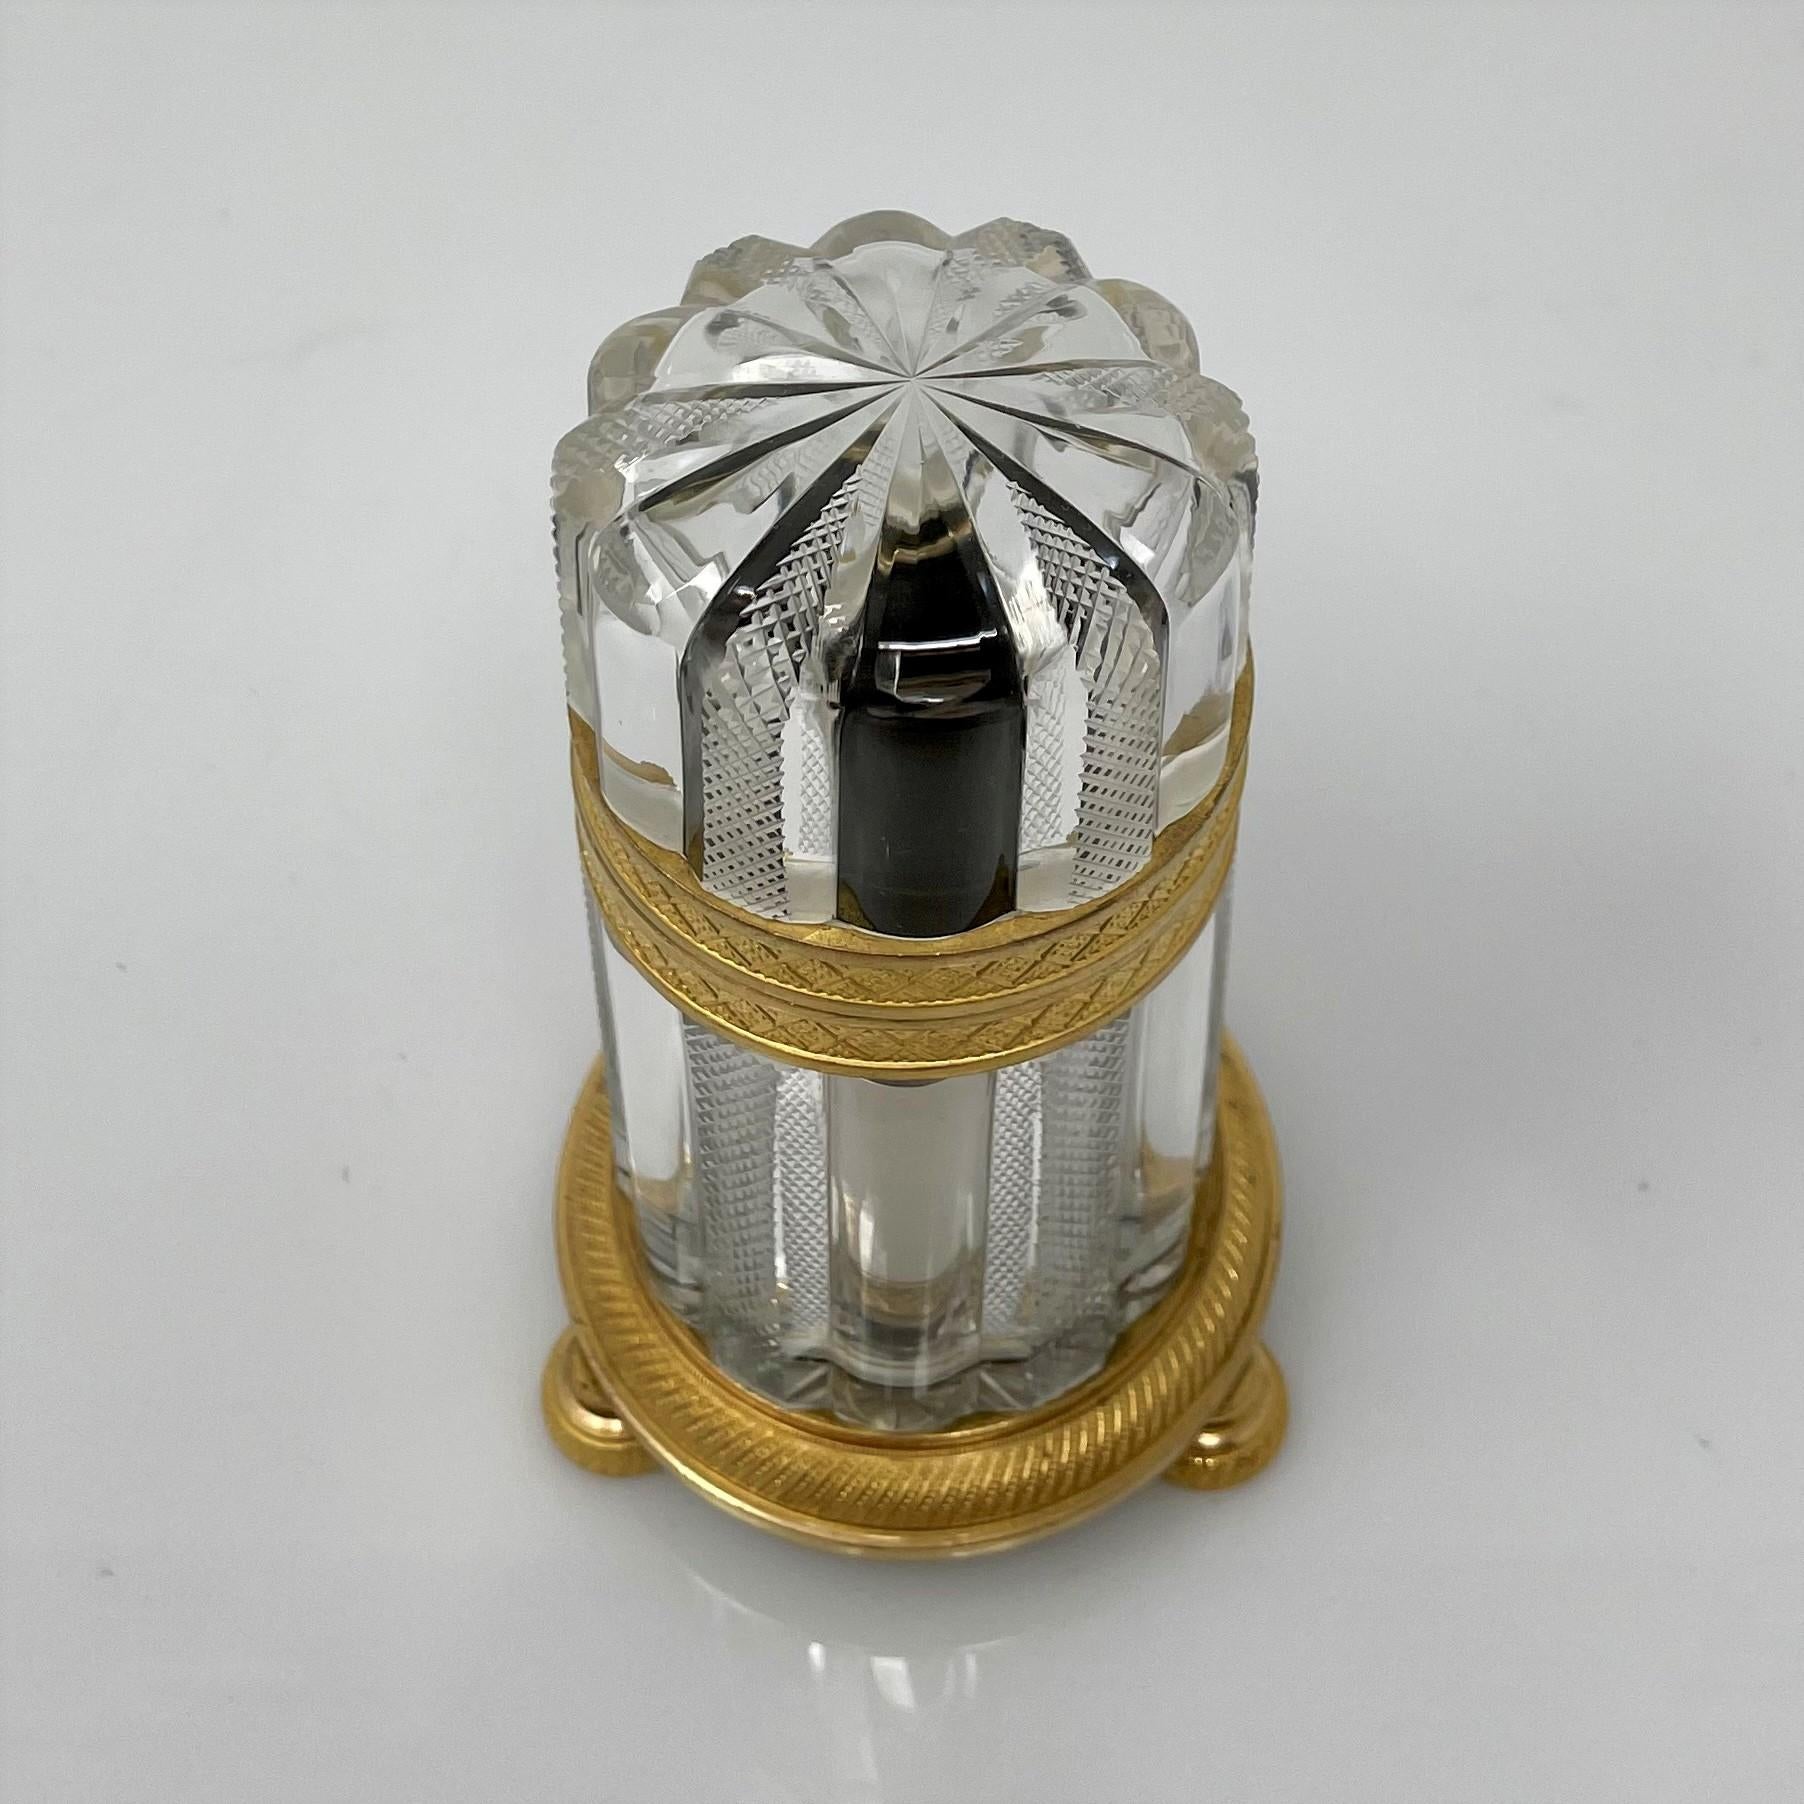 Petite Antique French cut crystal cylindrical trinket or jewel box with bronze D'ore Mounts, Circa 1890.